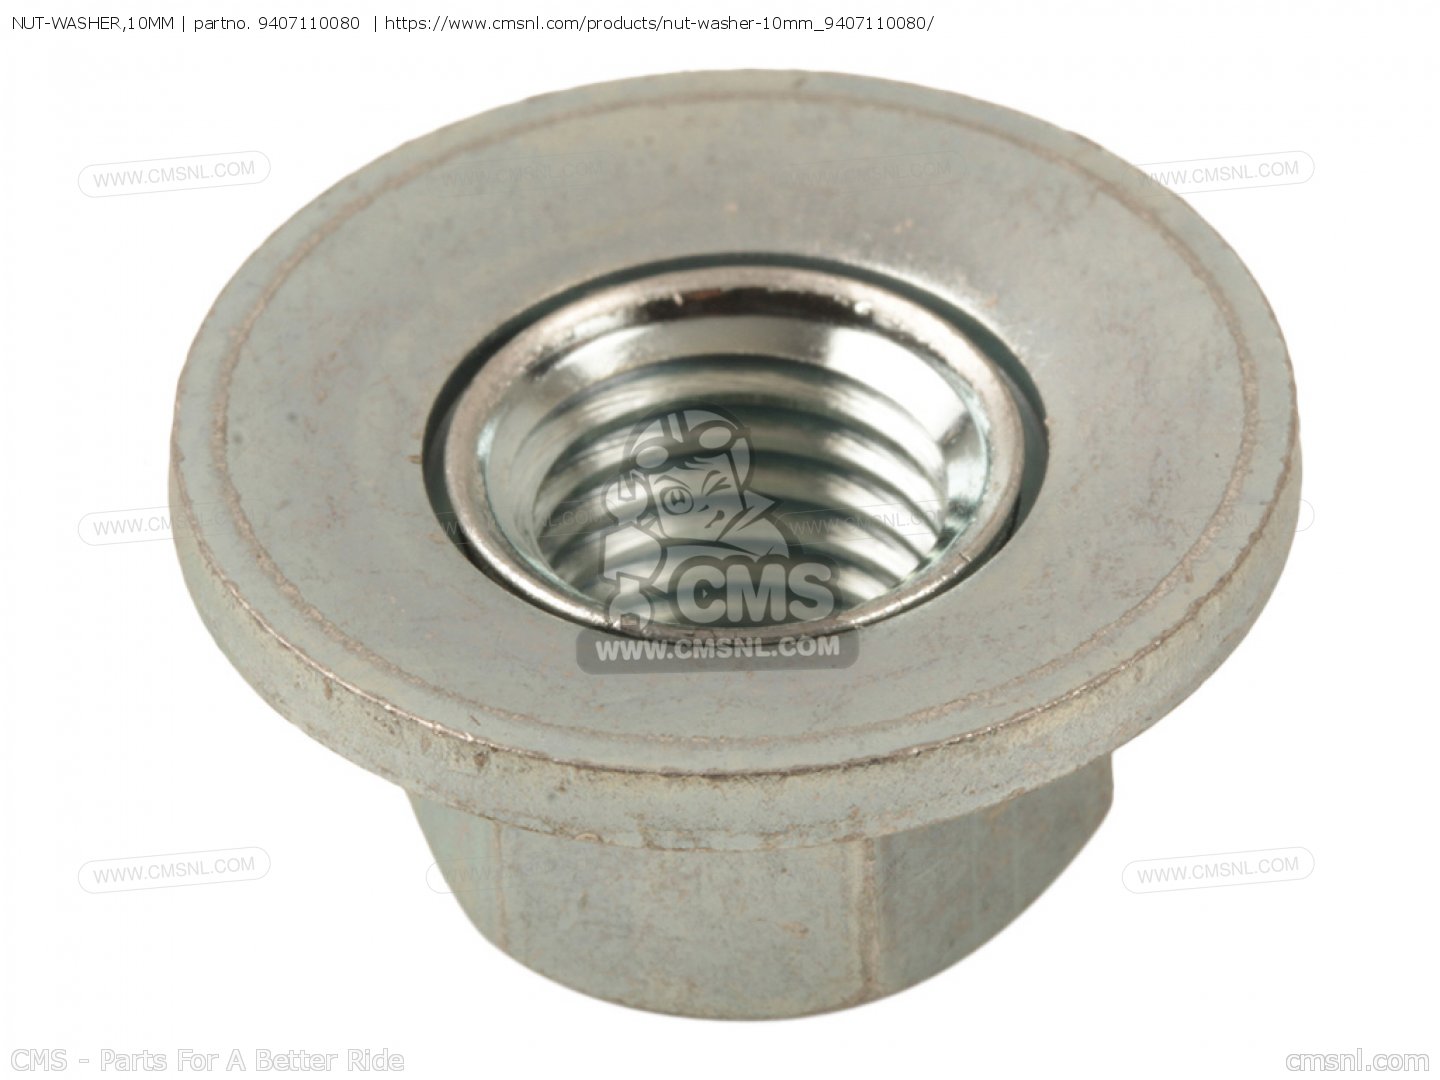 NUT-WASHER,10MM for CB550K3 FOUR ENGLAND - order at CMSNL